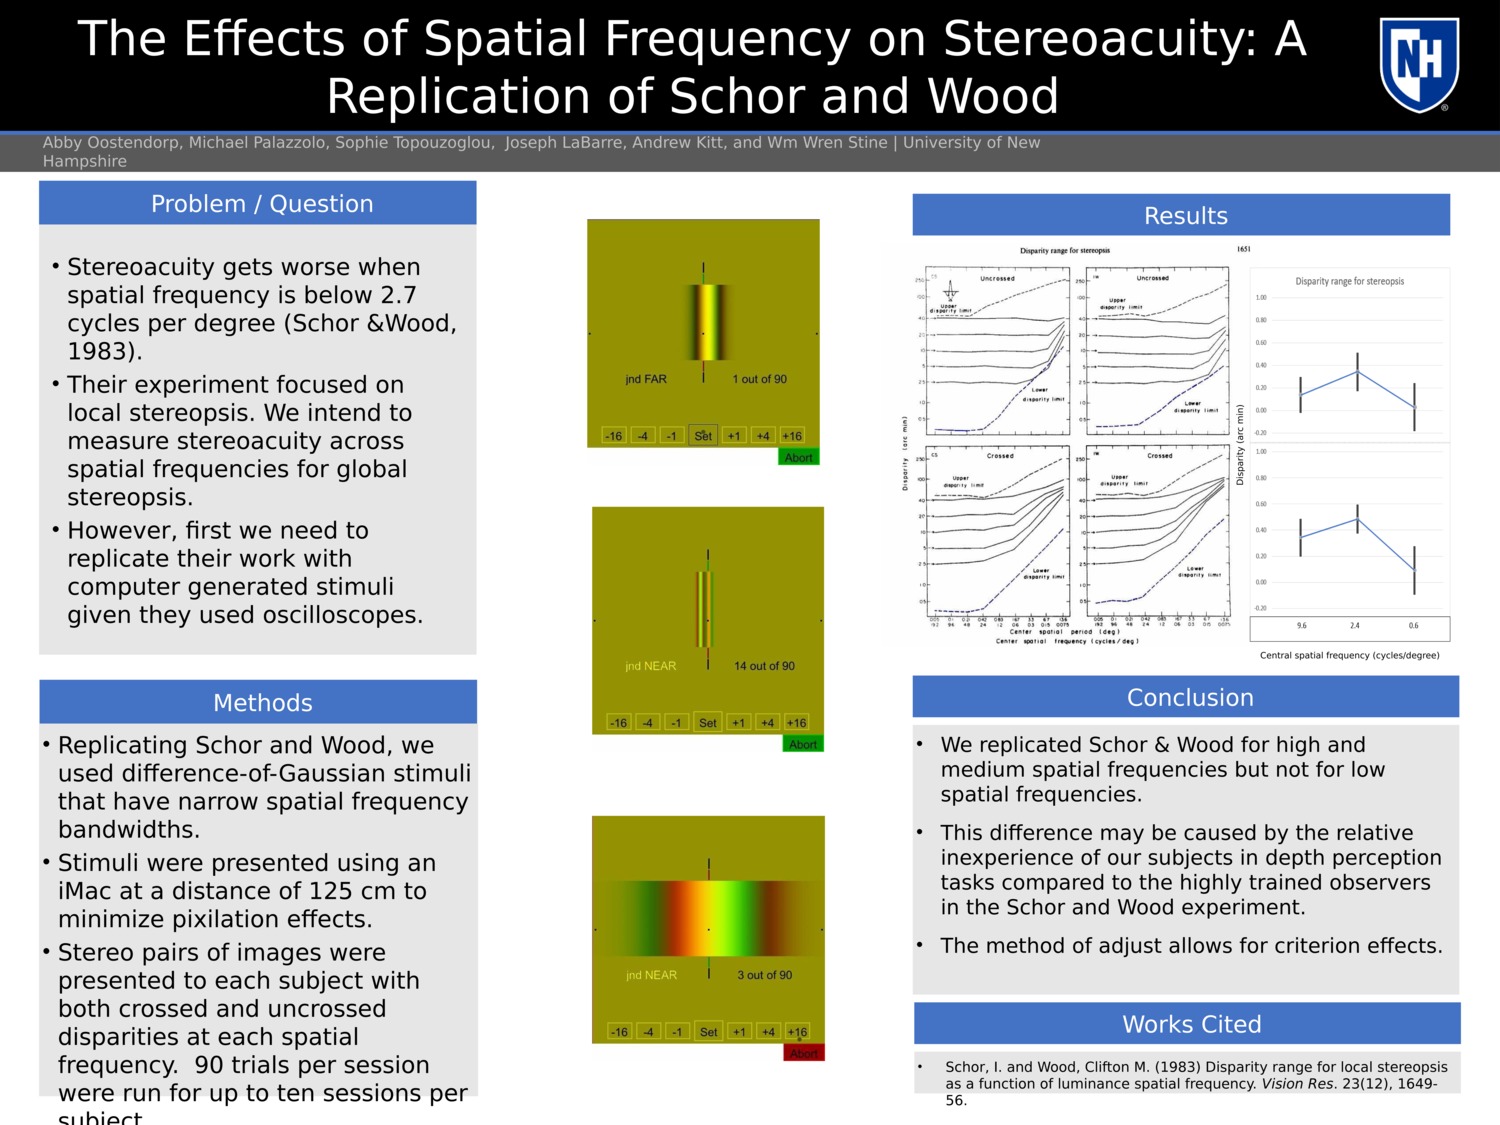 The Effects Of Spatial Frequency On Stereoacuity: A Replication Of Schor And Wood by aeo1007